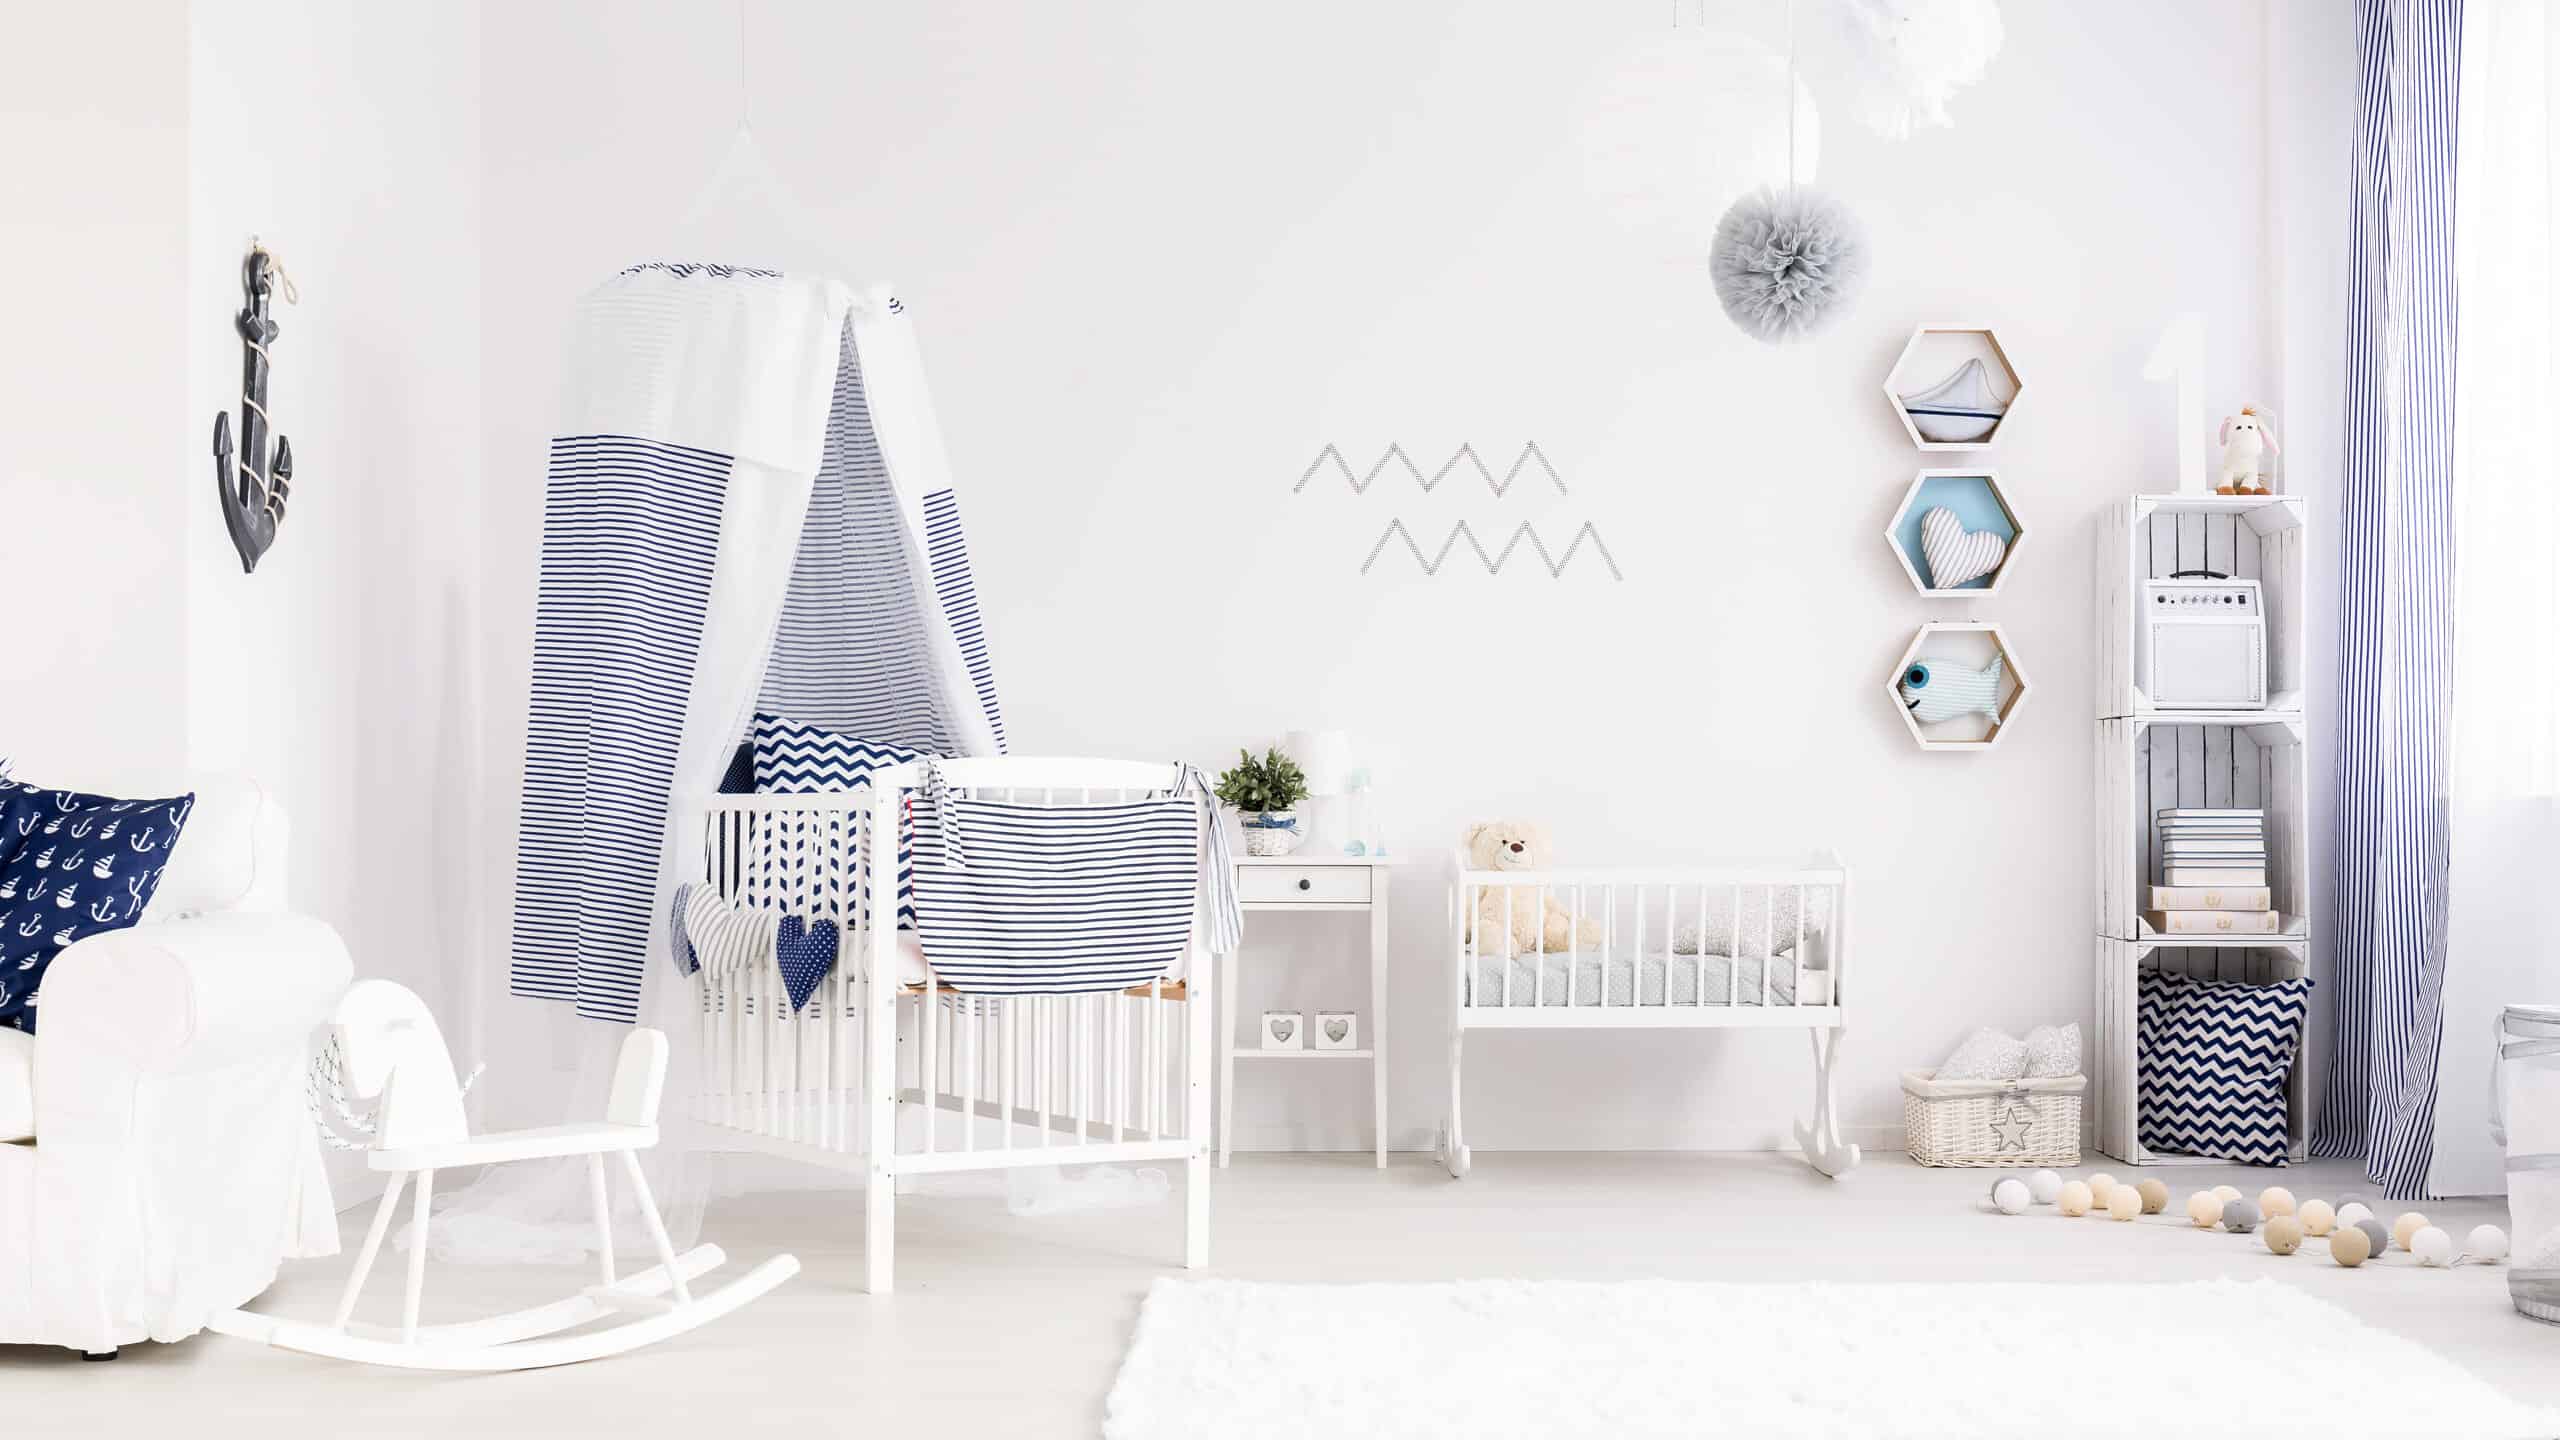 The best baby's room ideas for functionality.